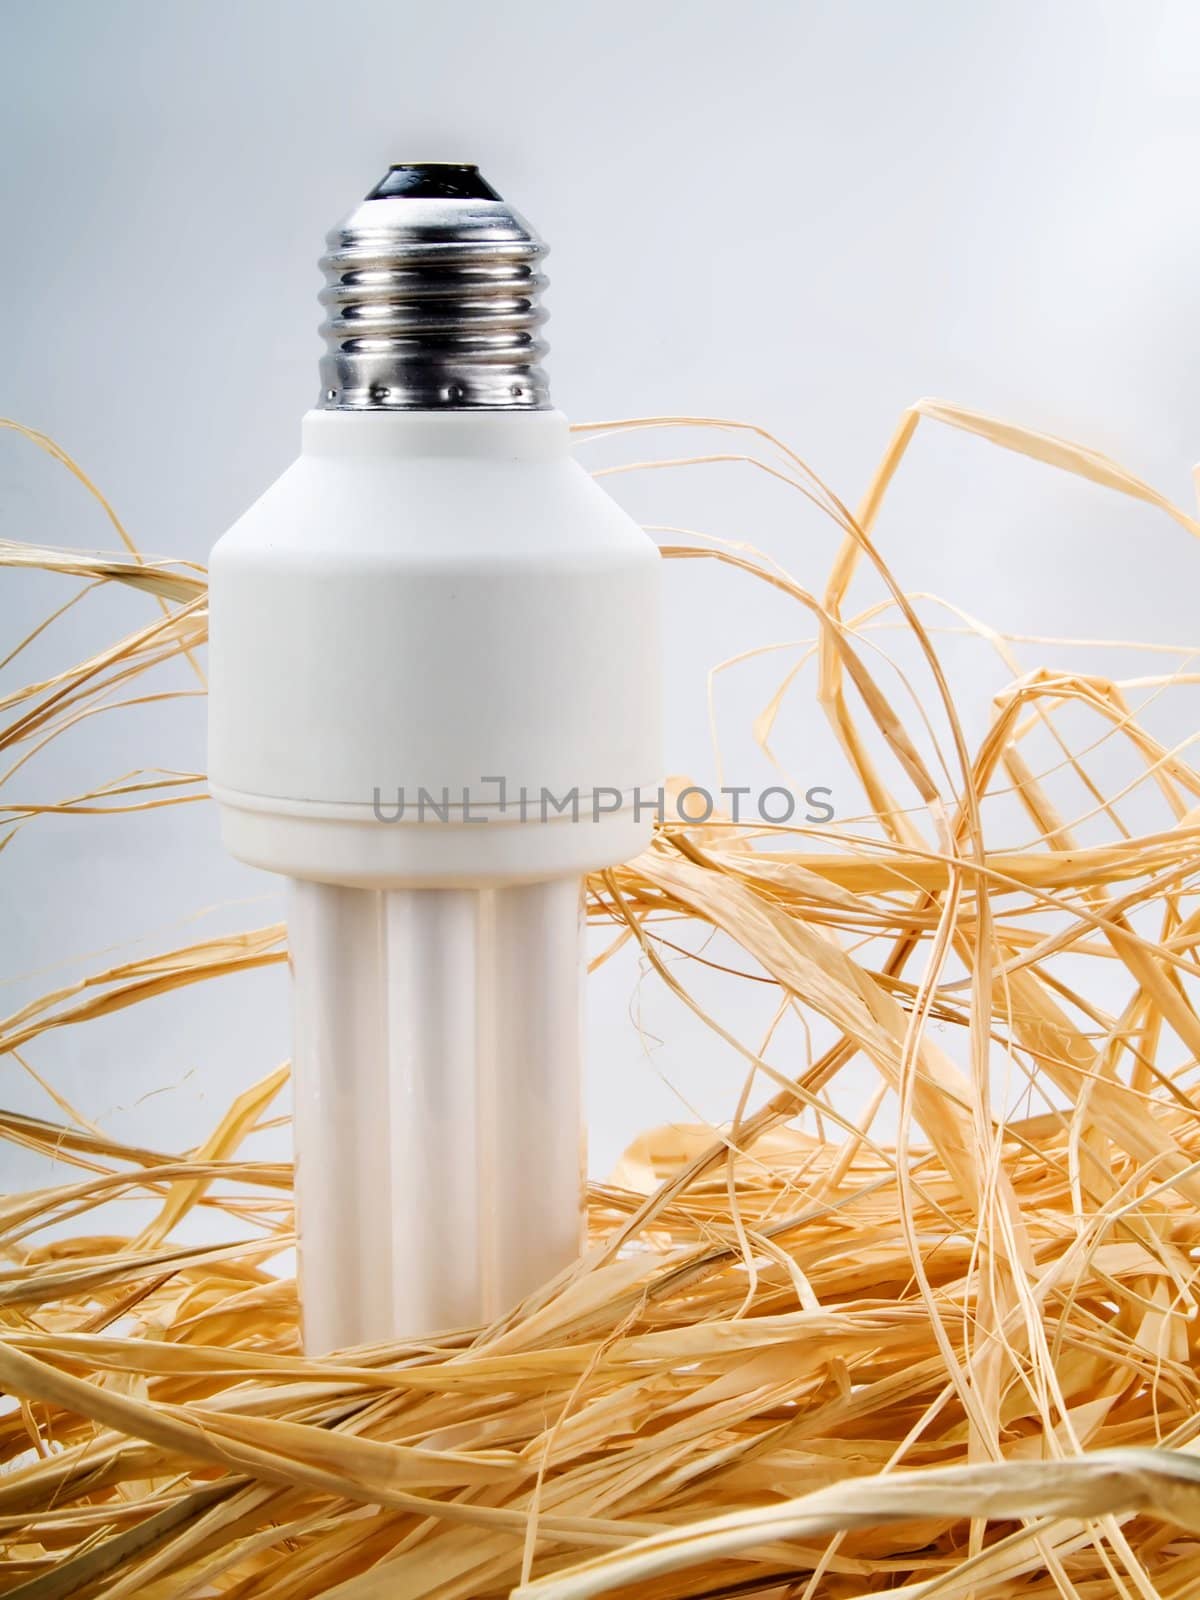 Low energy bulb by henrischmit